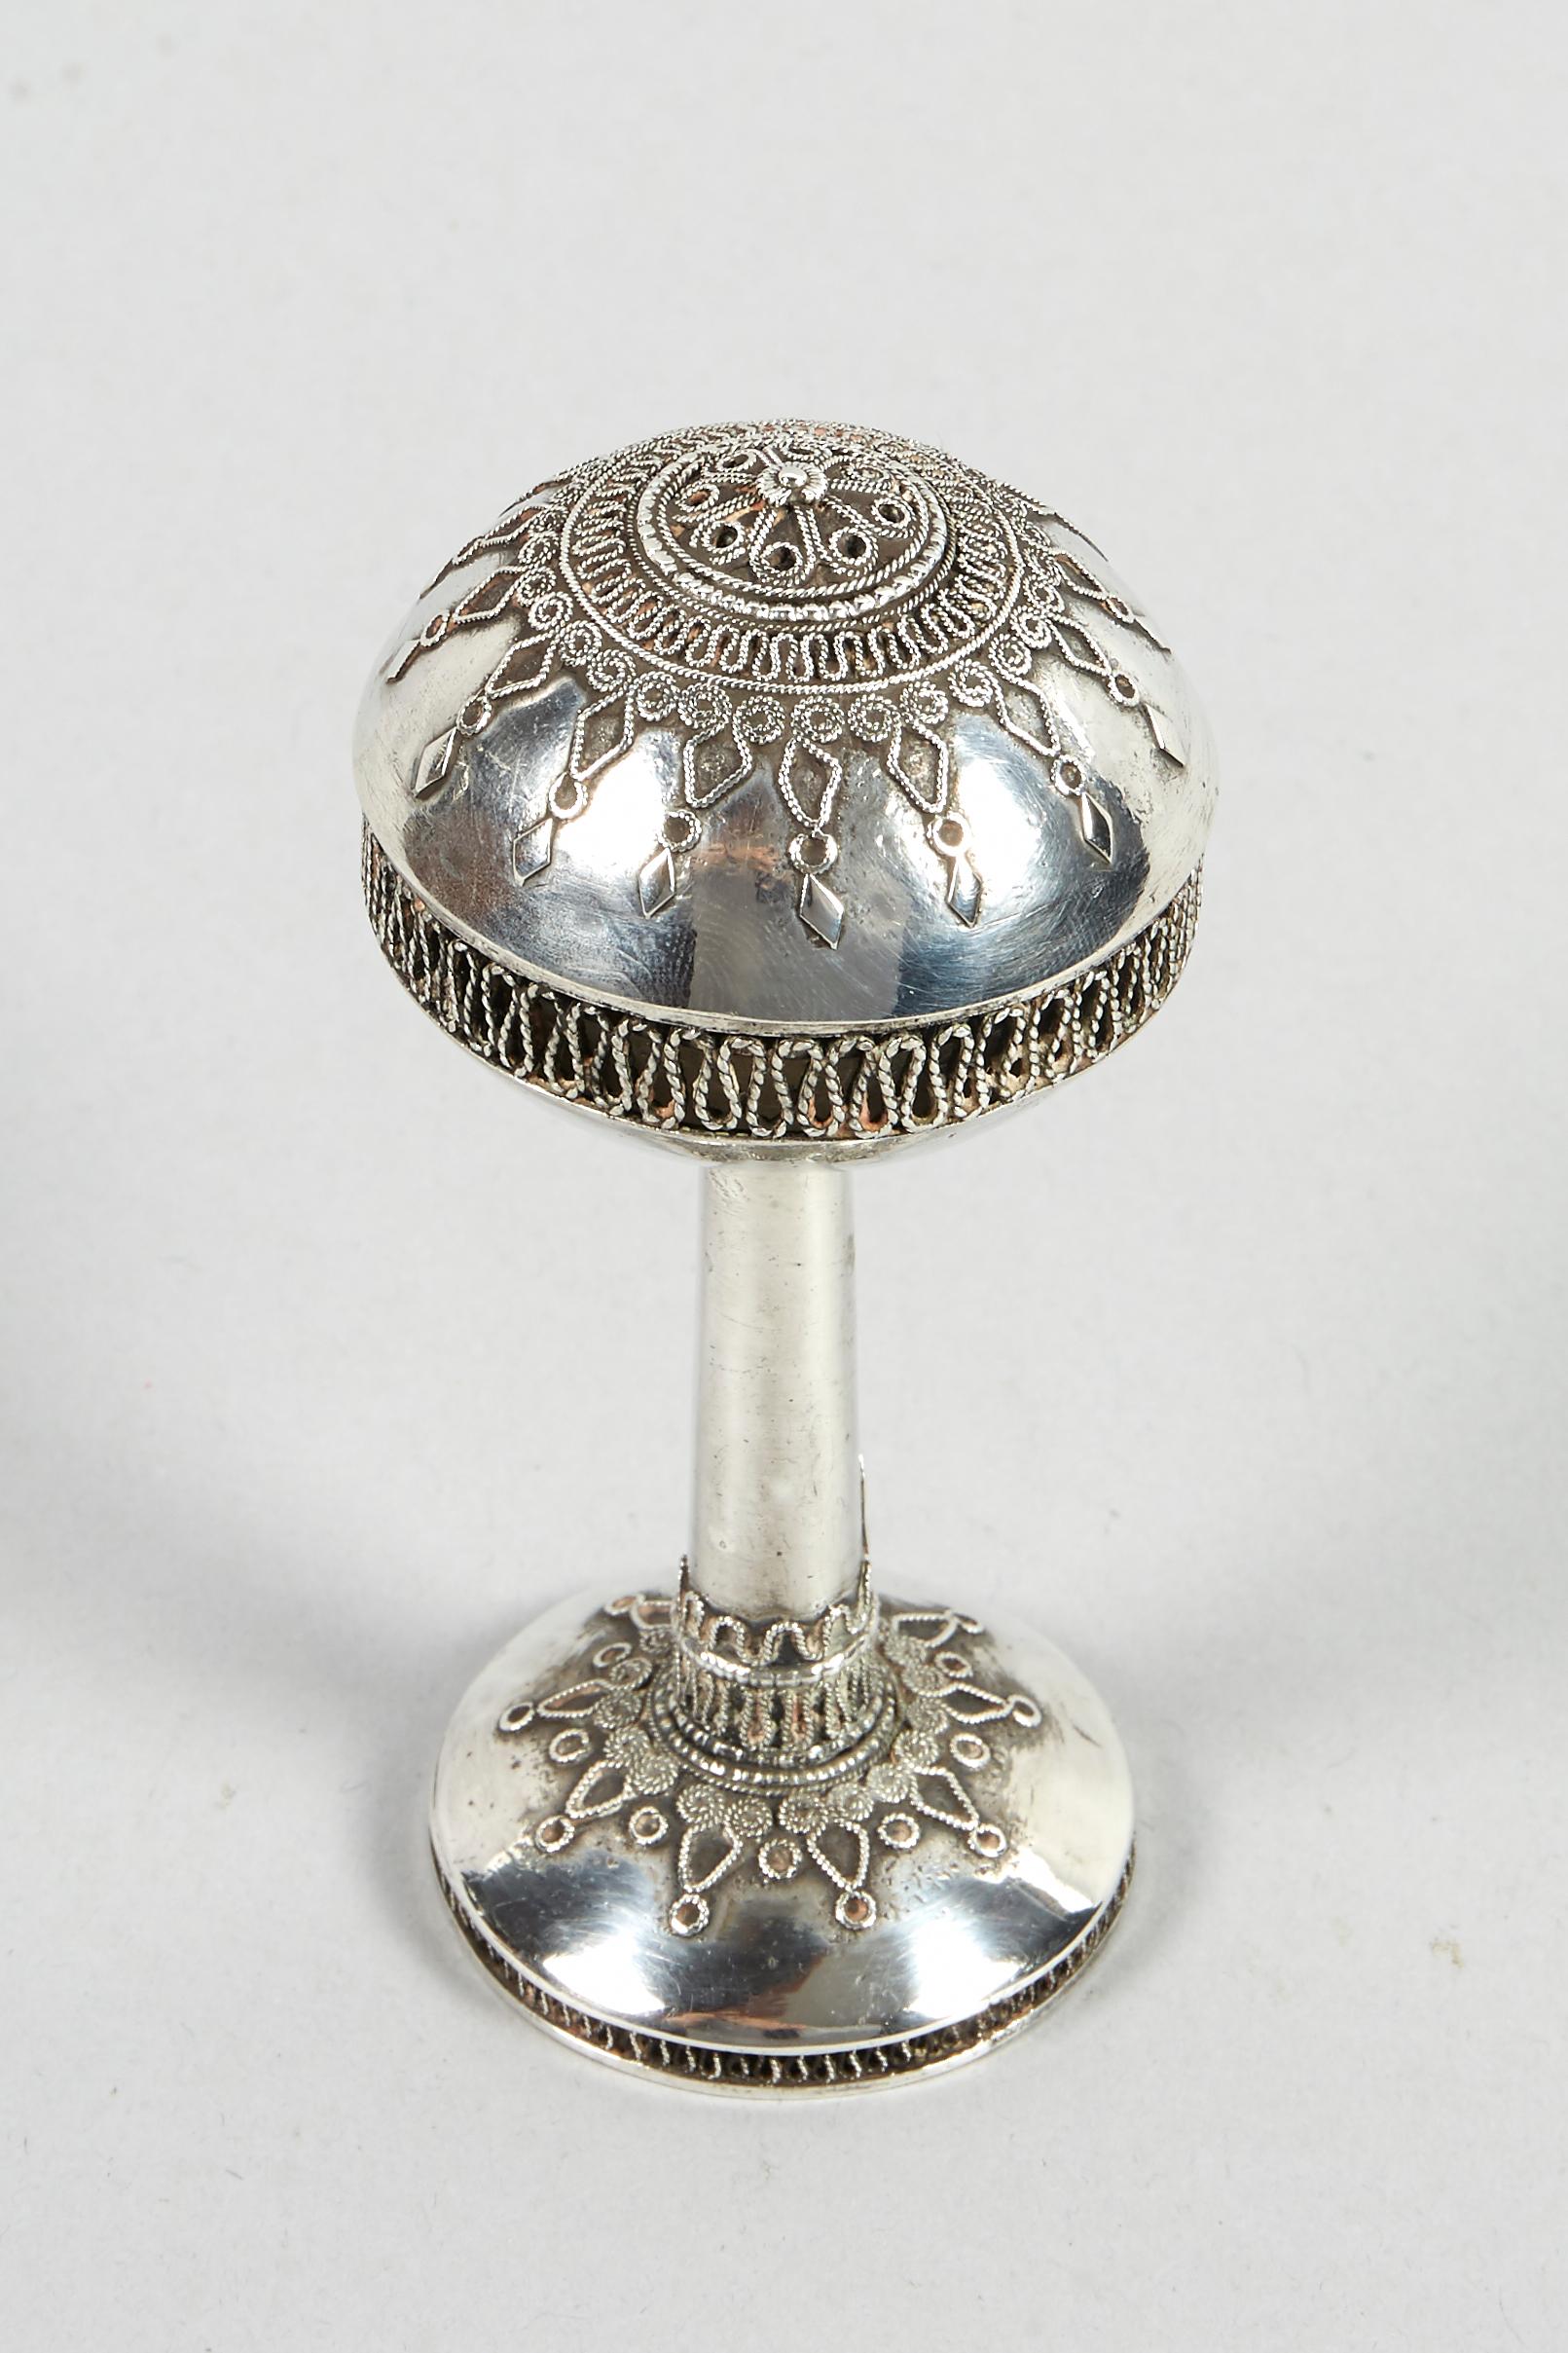 Silver and silver filigree spice container, Jerusalem, circa 1920. 
Ball spice container raised on a stem, On a round decorated base with filigree midsection. The lid is covered with matching filigree decoration to the base.
Marked 